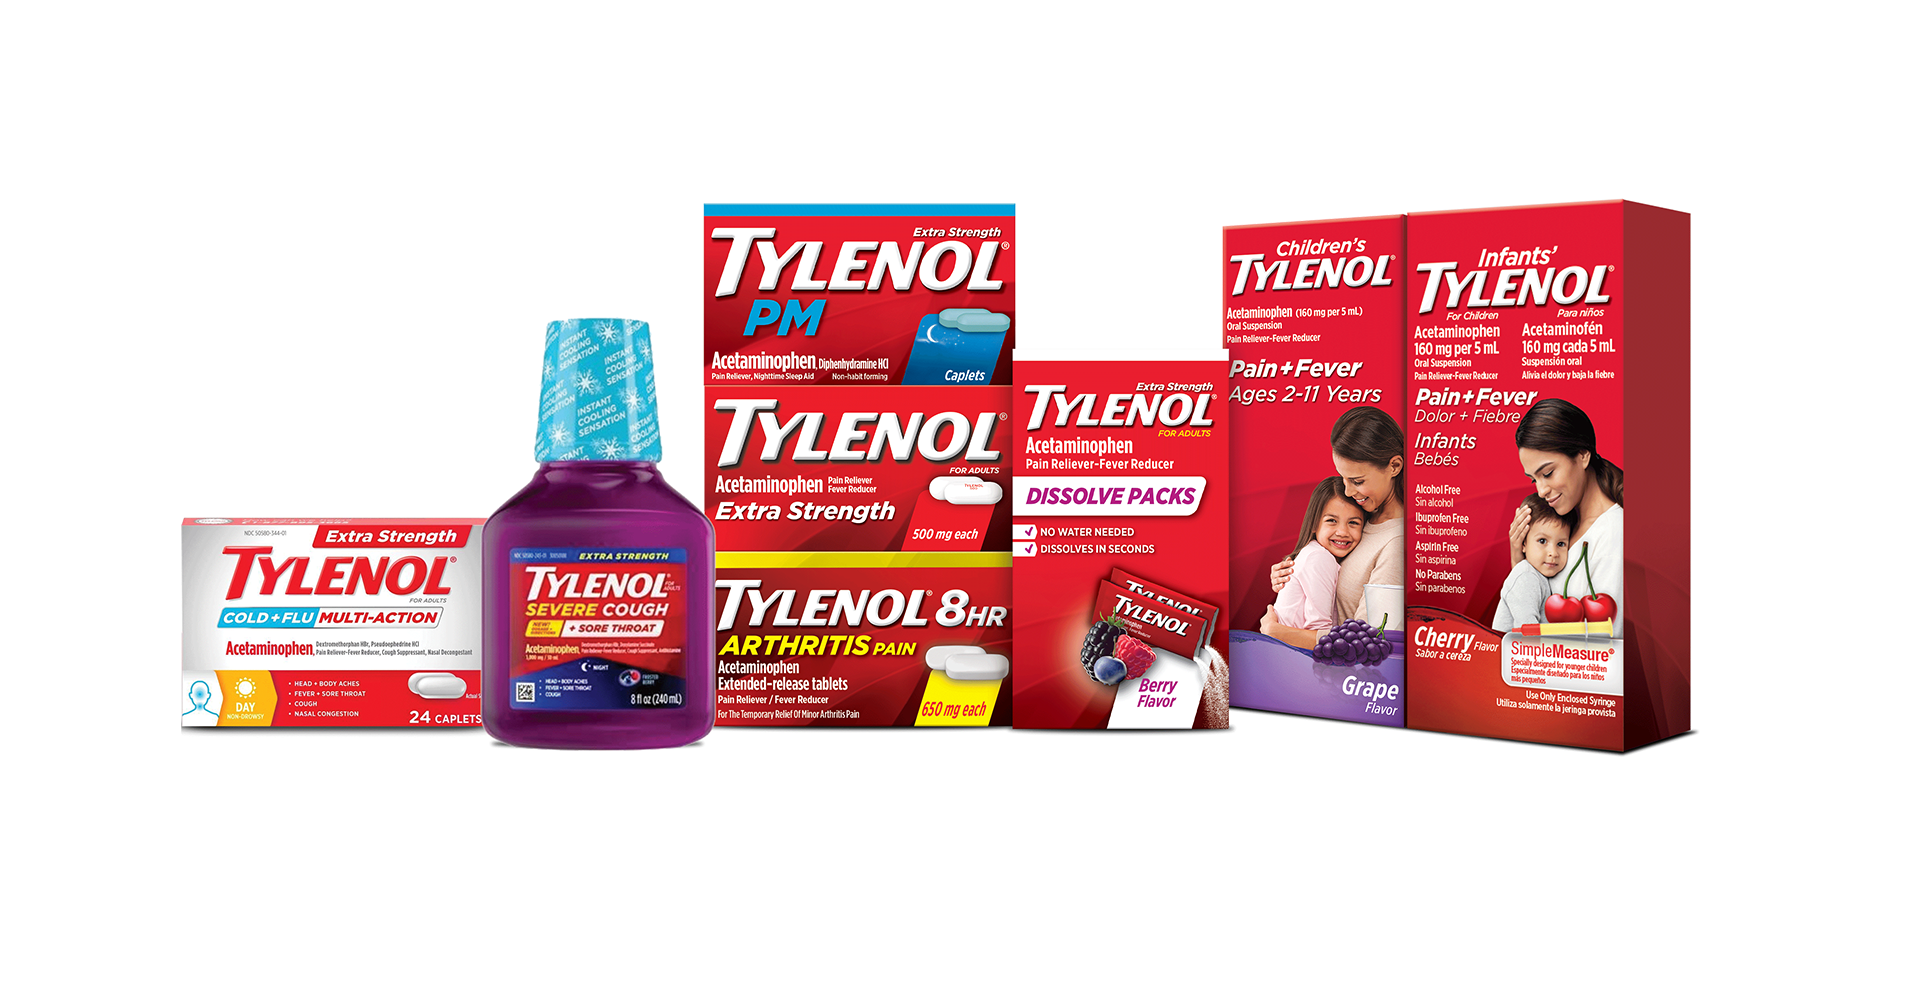 The Tylenol® line of products for children's and adults pain relief and fever reduction